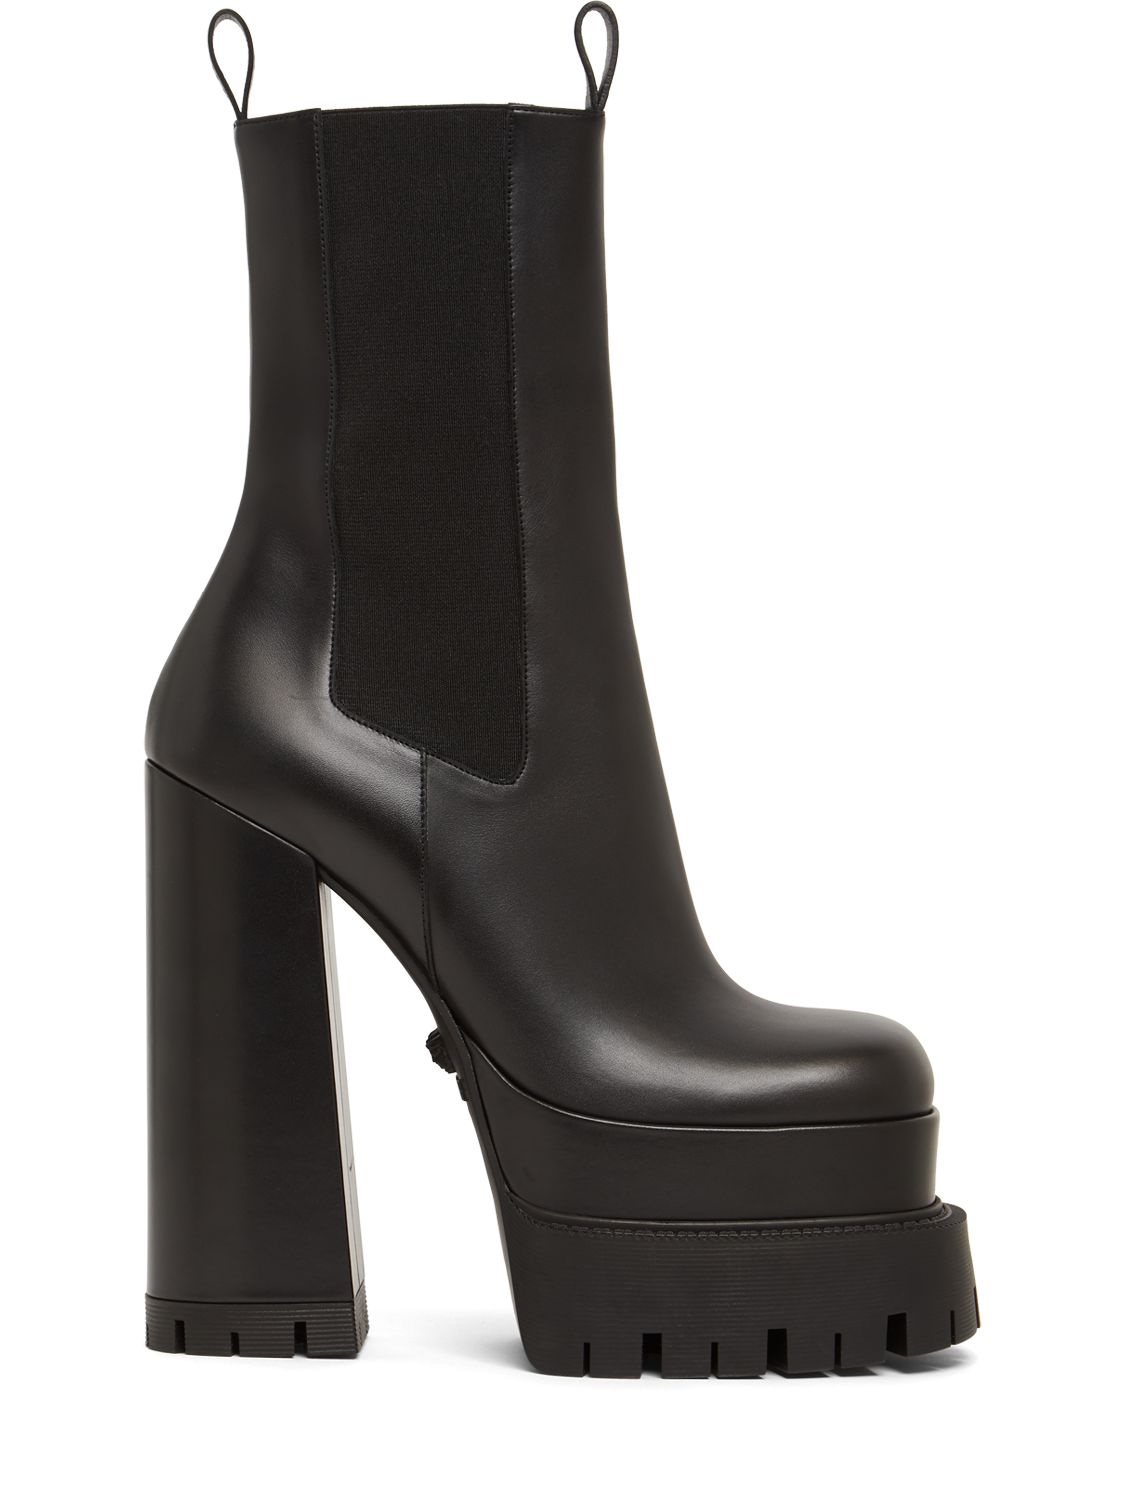 160mm Leather Platform Ankle Boots